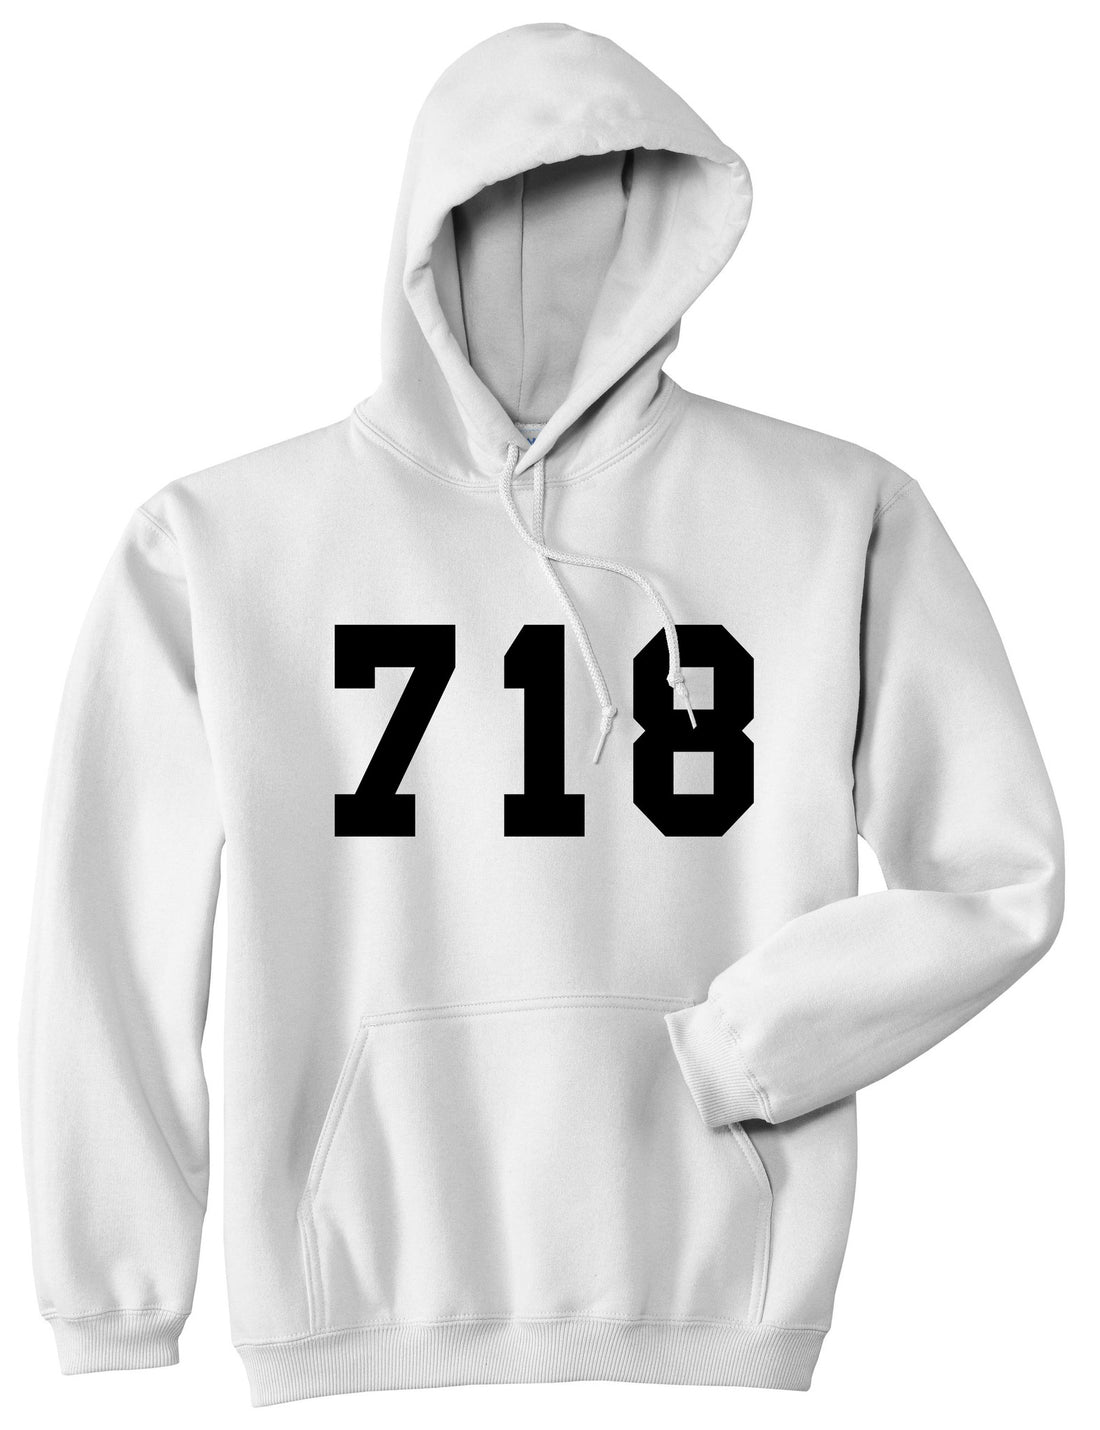 718 New York Area Code Pullover Hoodie in White By Kings Of NY